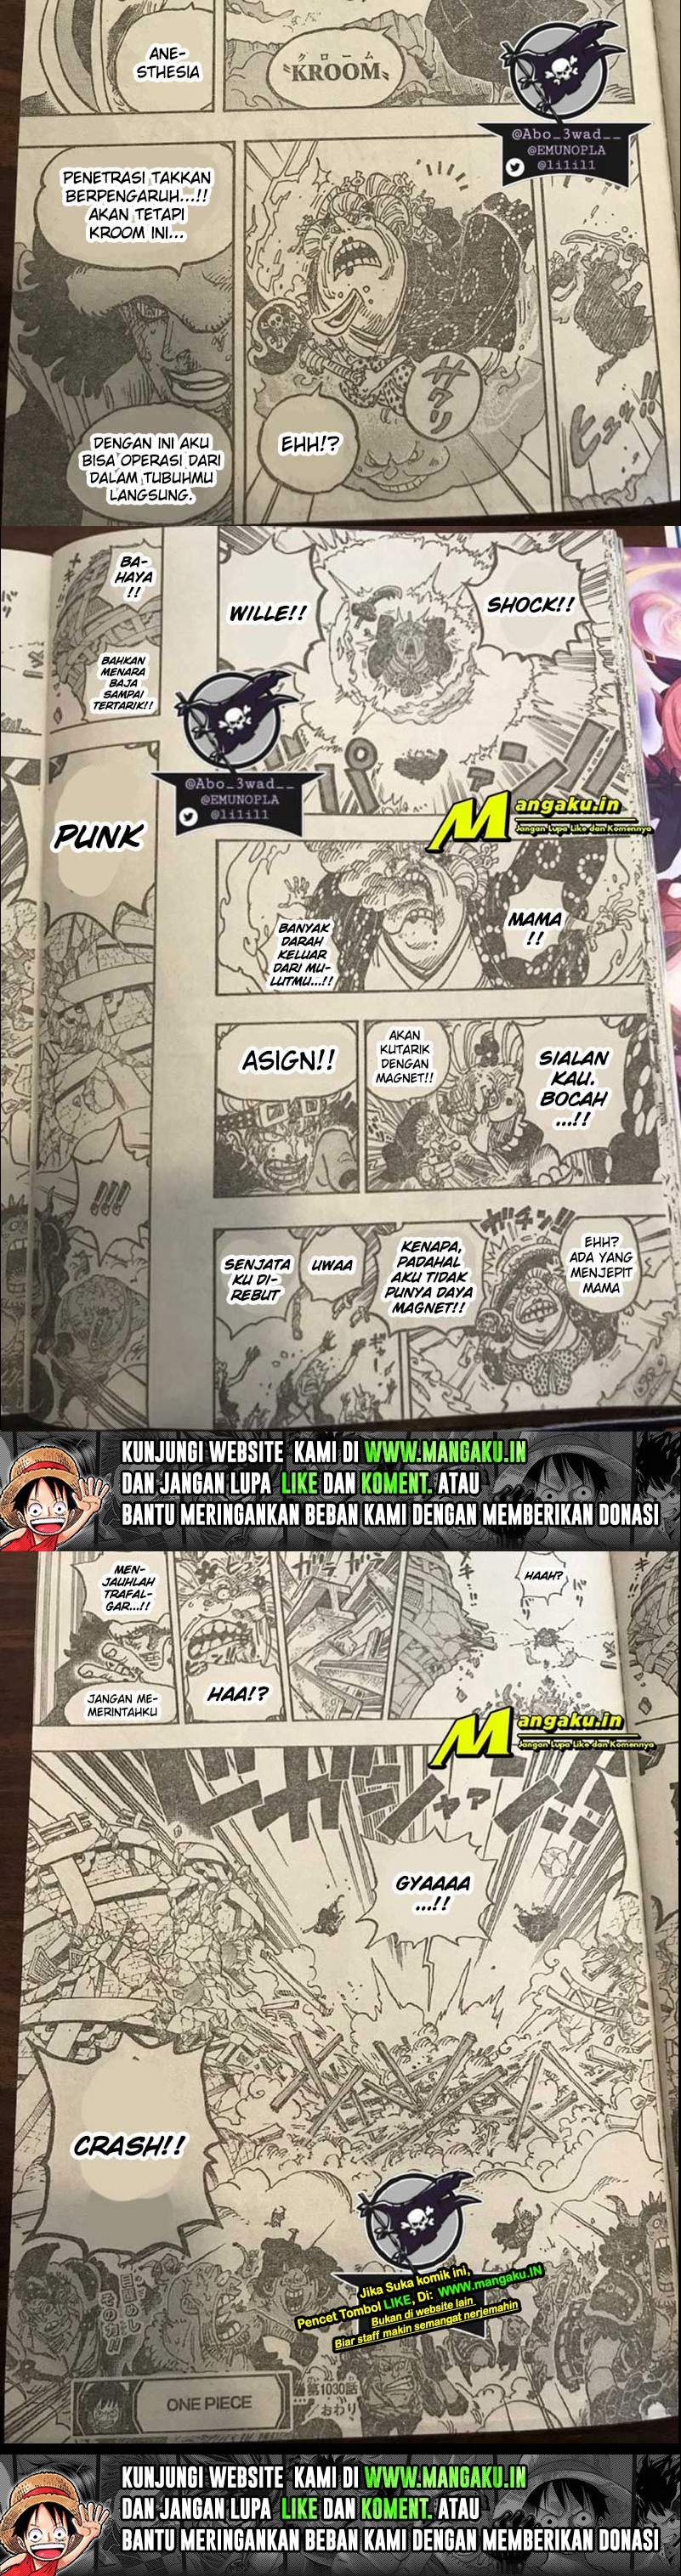 One Piece Chapter 1030 Lq - 39